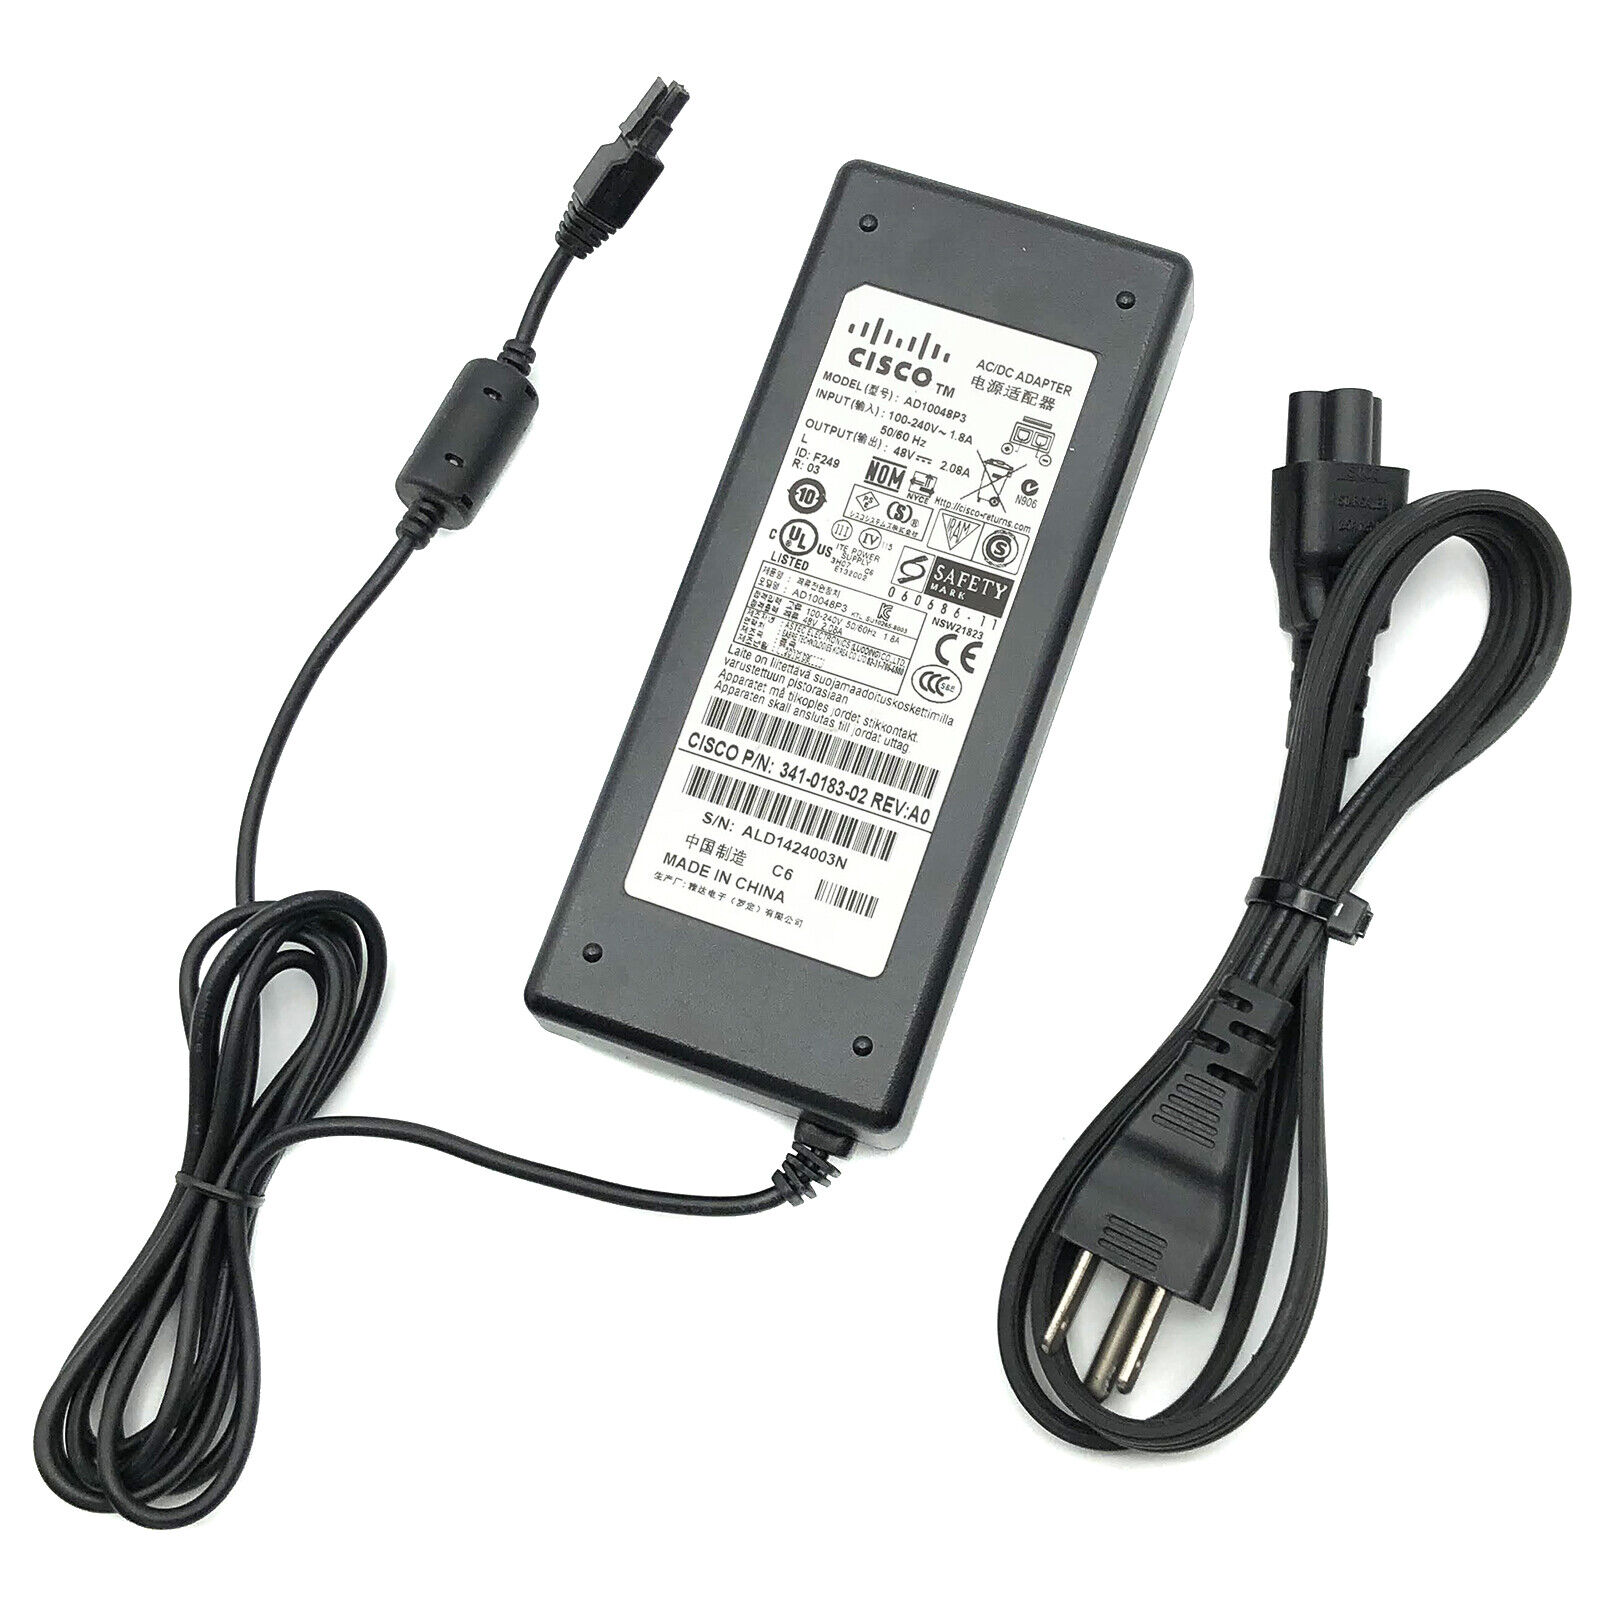 Genuine 48V AC Adapter for Cisco AIR-CT2504-K9 2500 Series LAN Controller w/PC